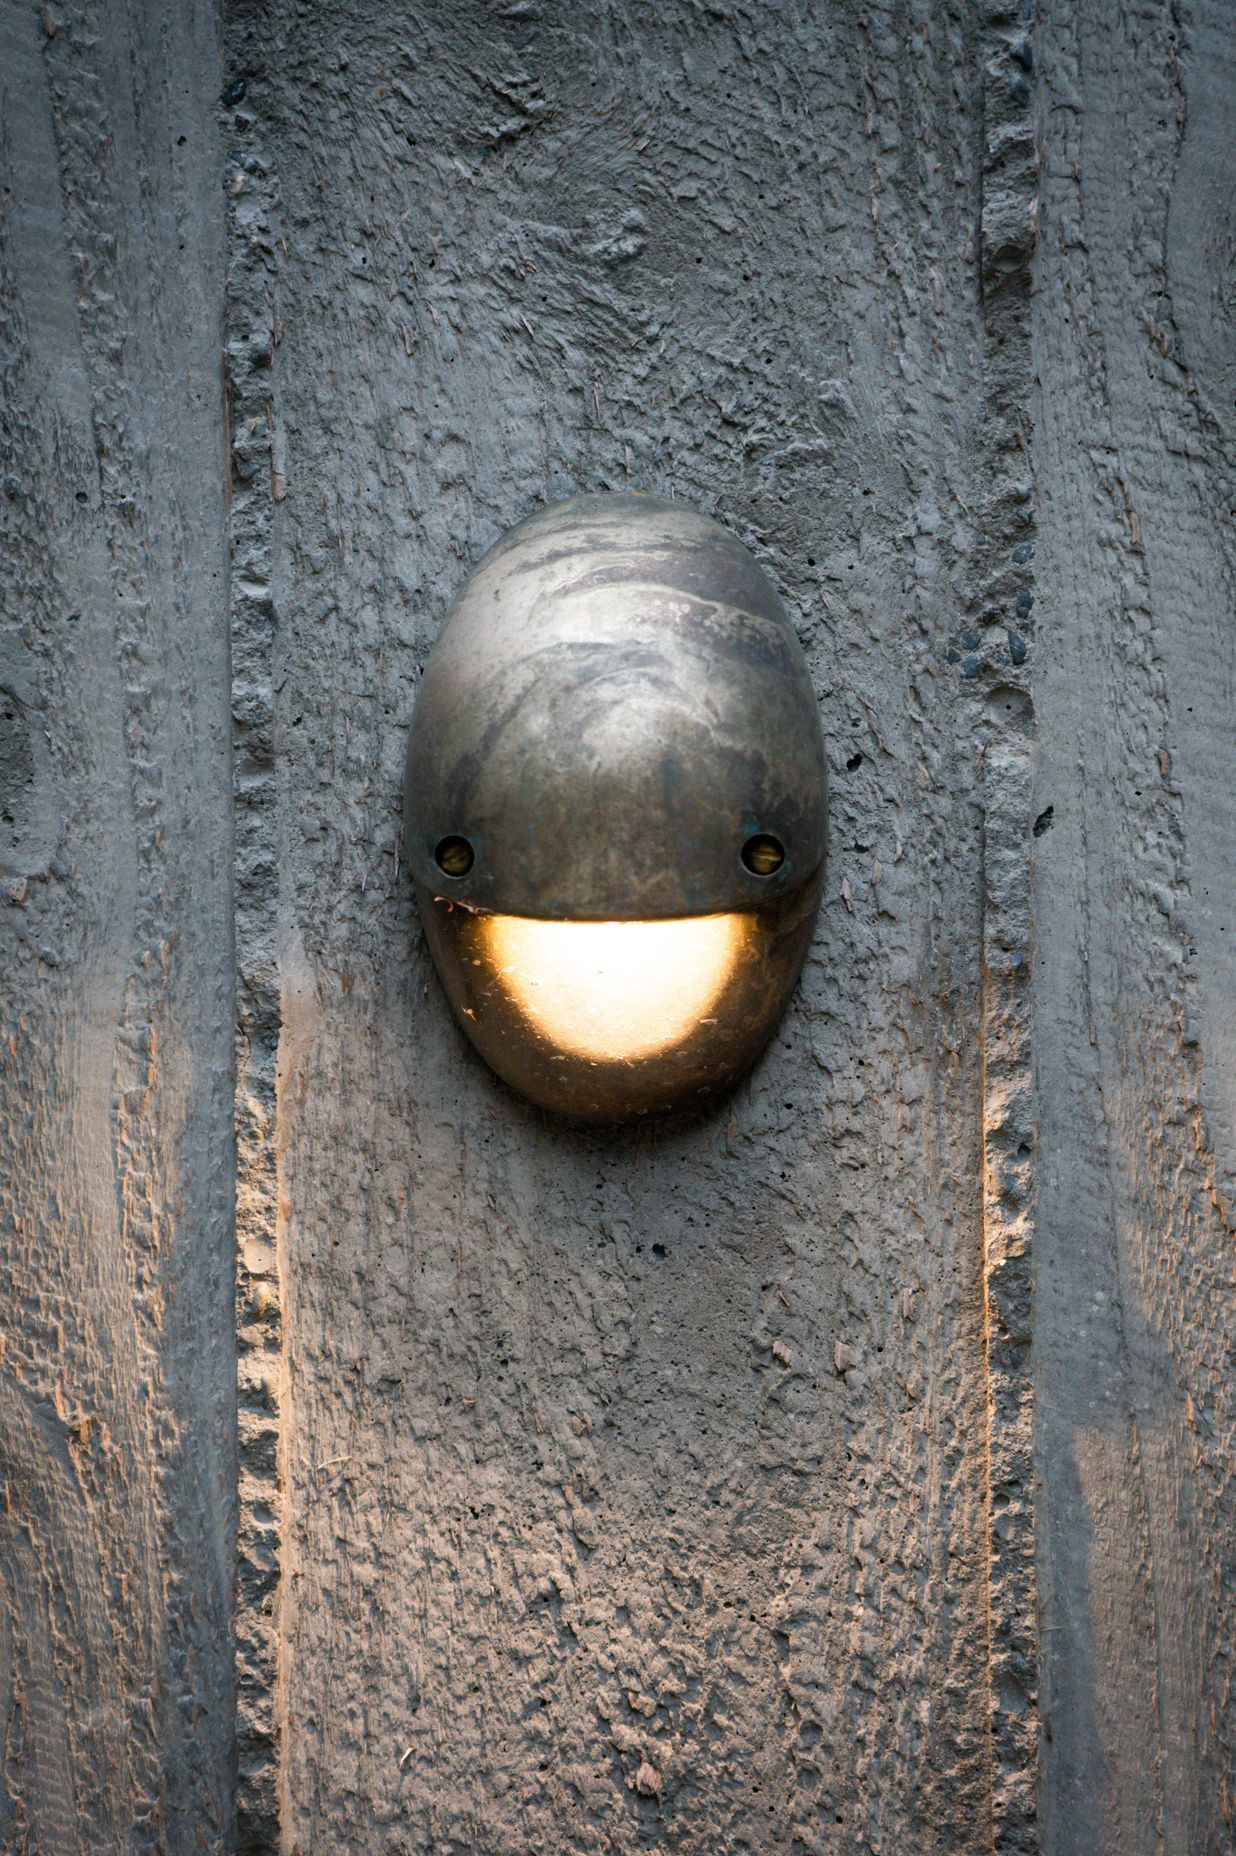 Lighting highlights the rough texture of the concrete.